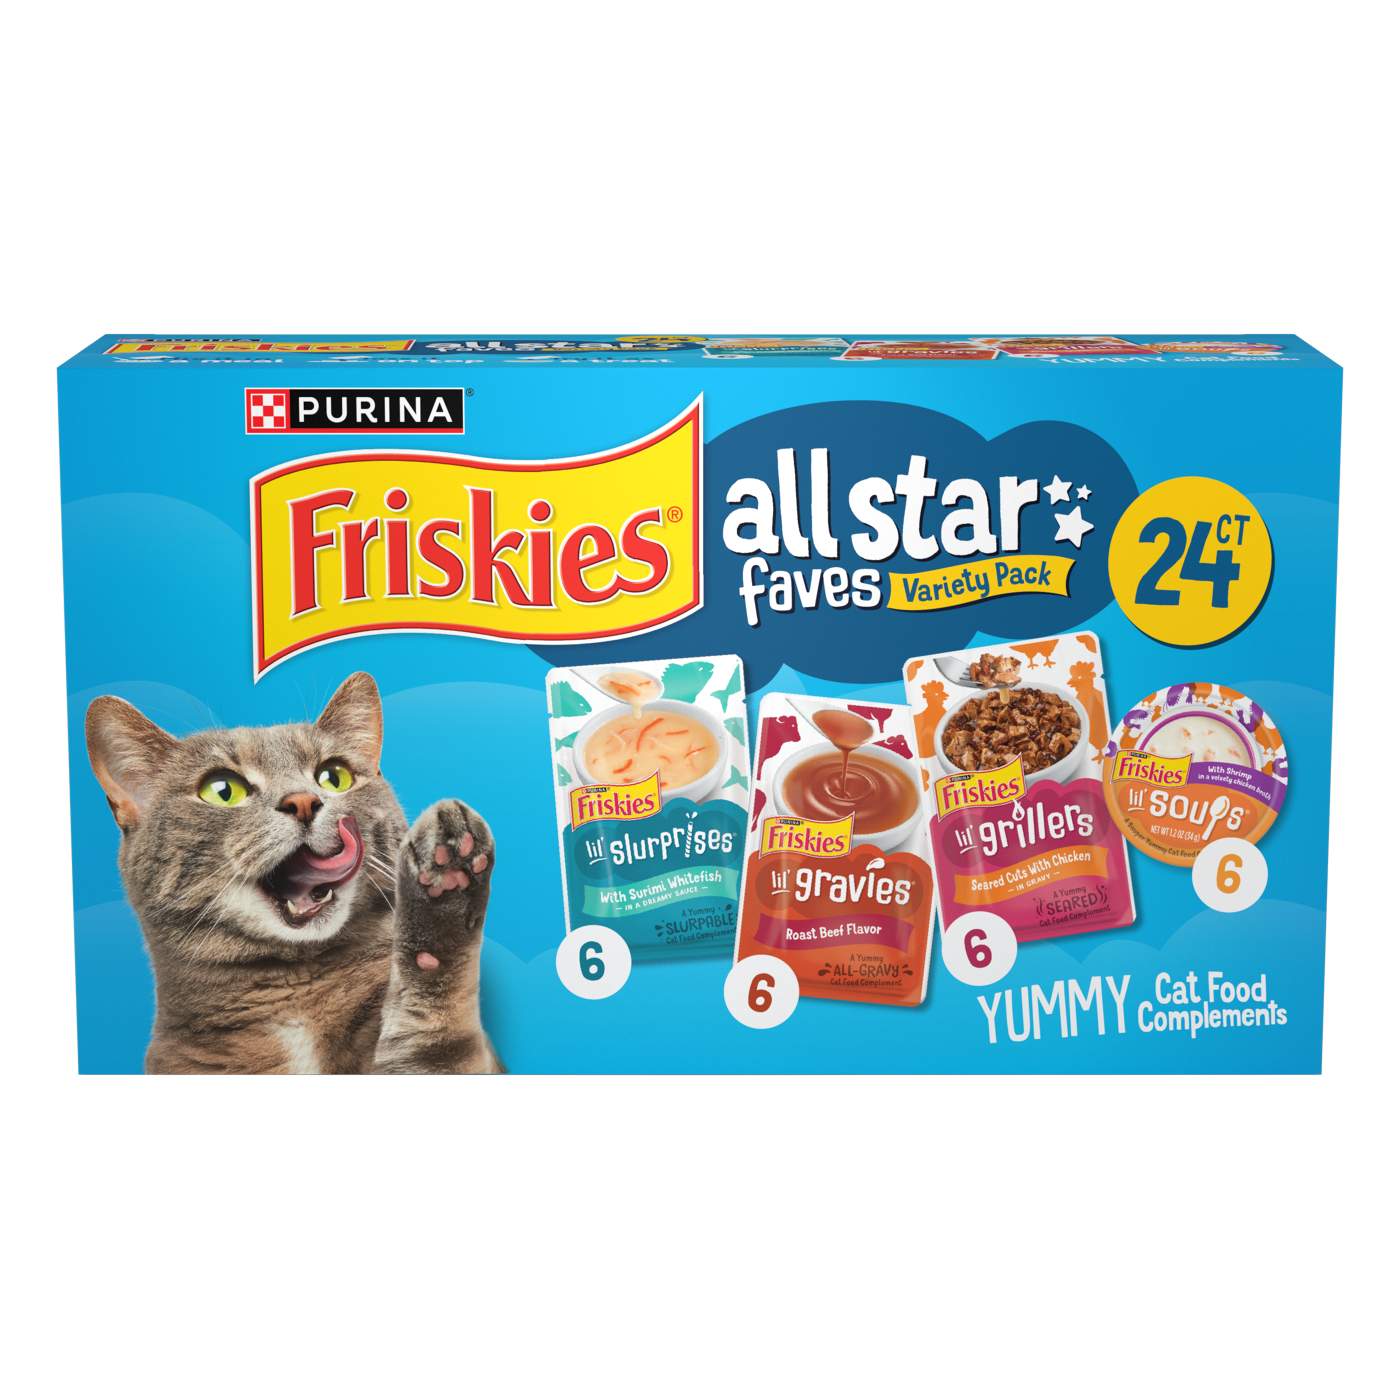 Friskies Wet Cat Treats Variety Pack, All Star Faves; image 1 of 8